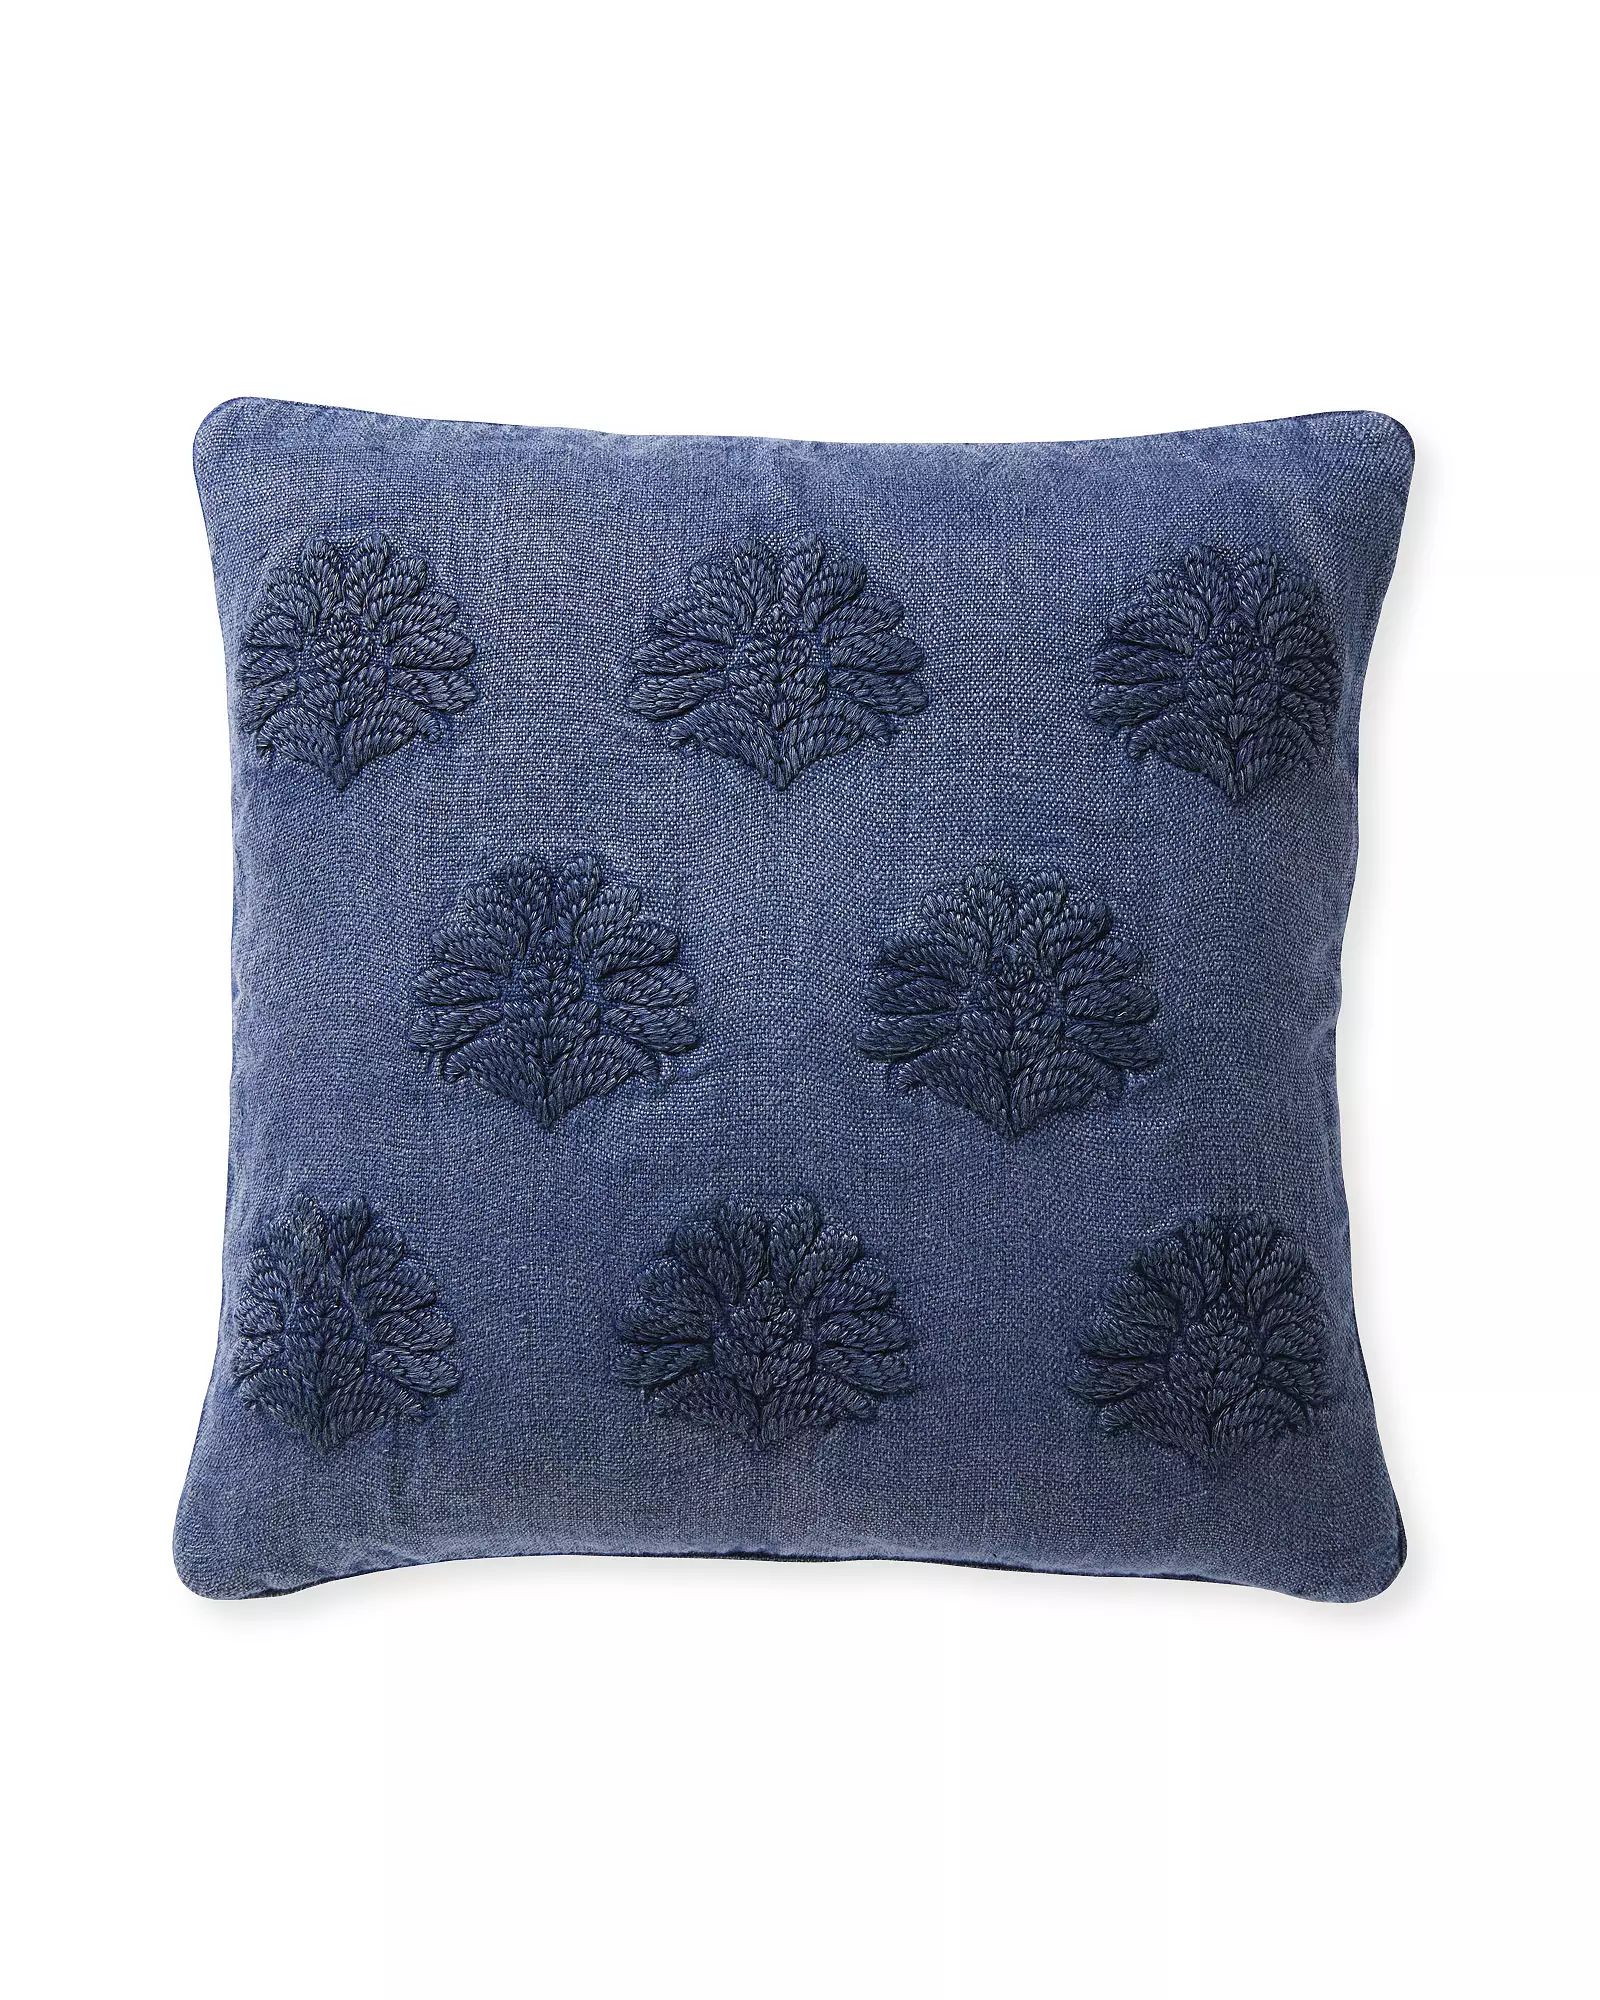 Miramonte Pillow Cover | Serena and Lily